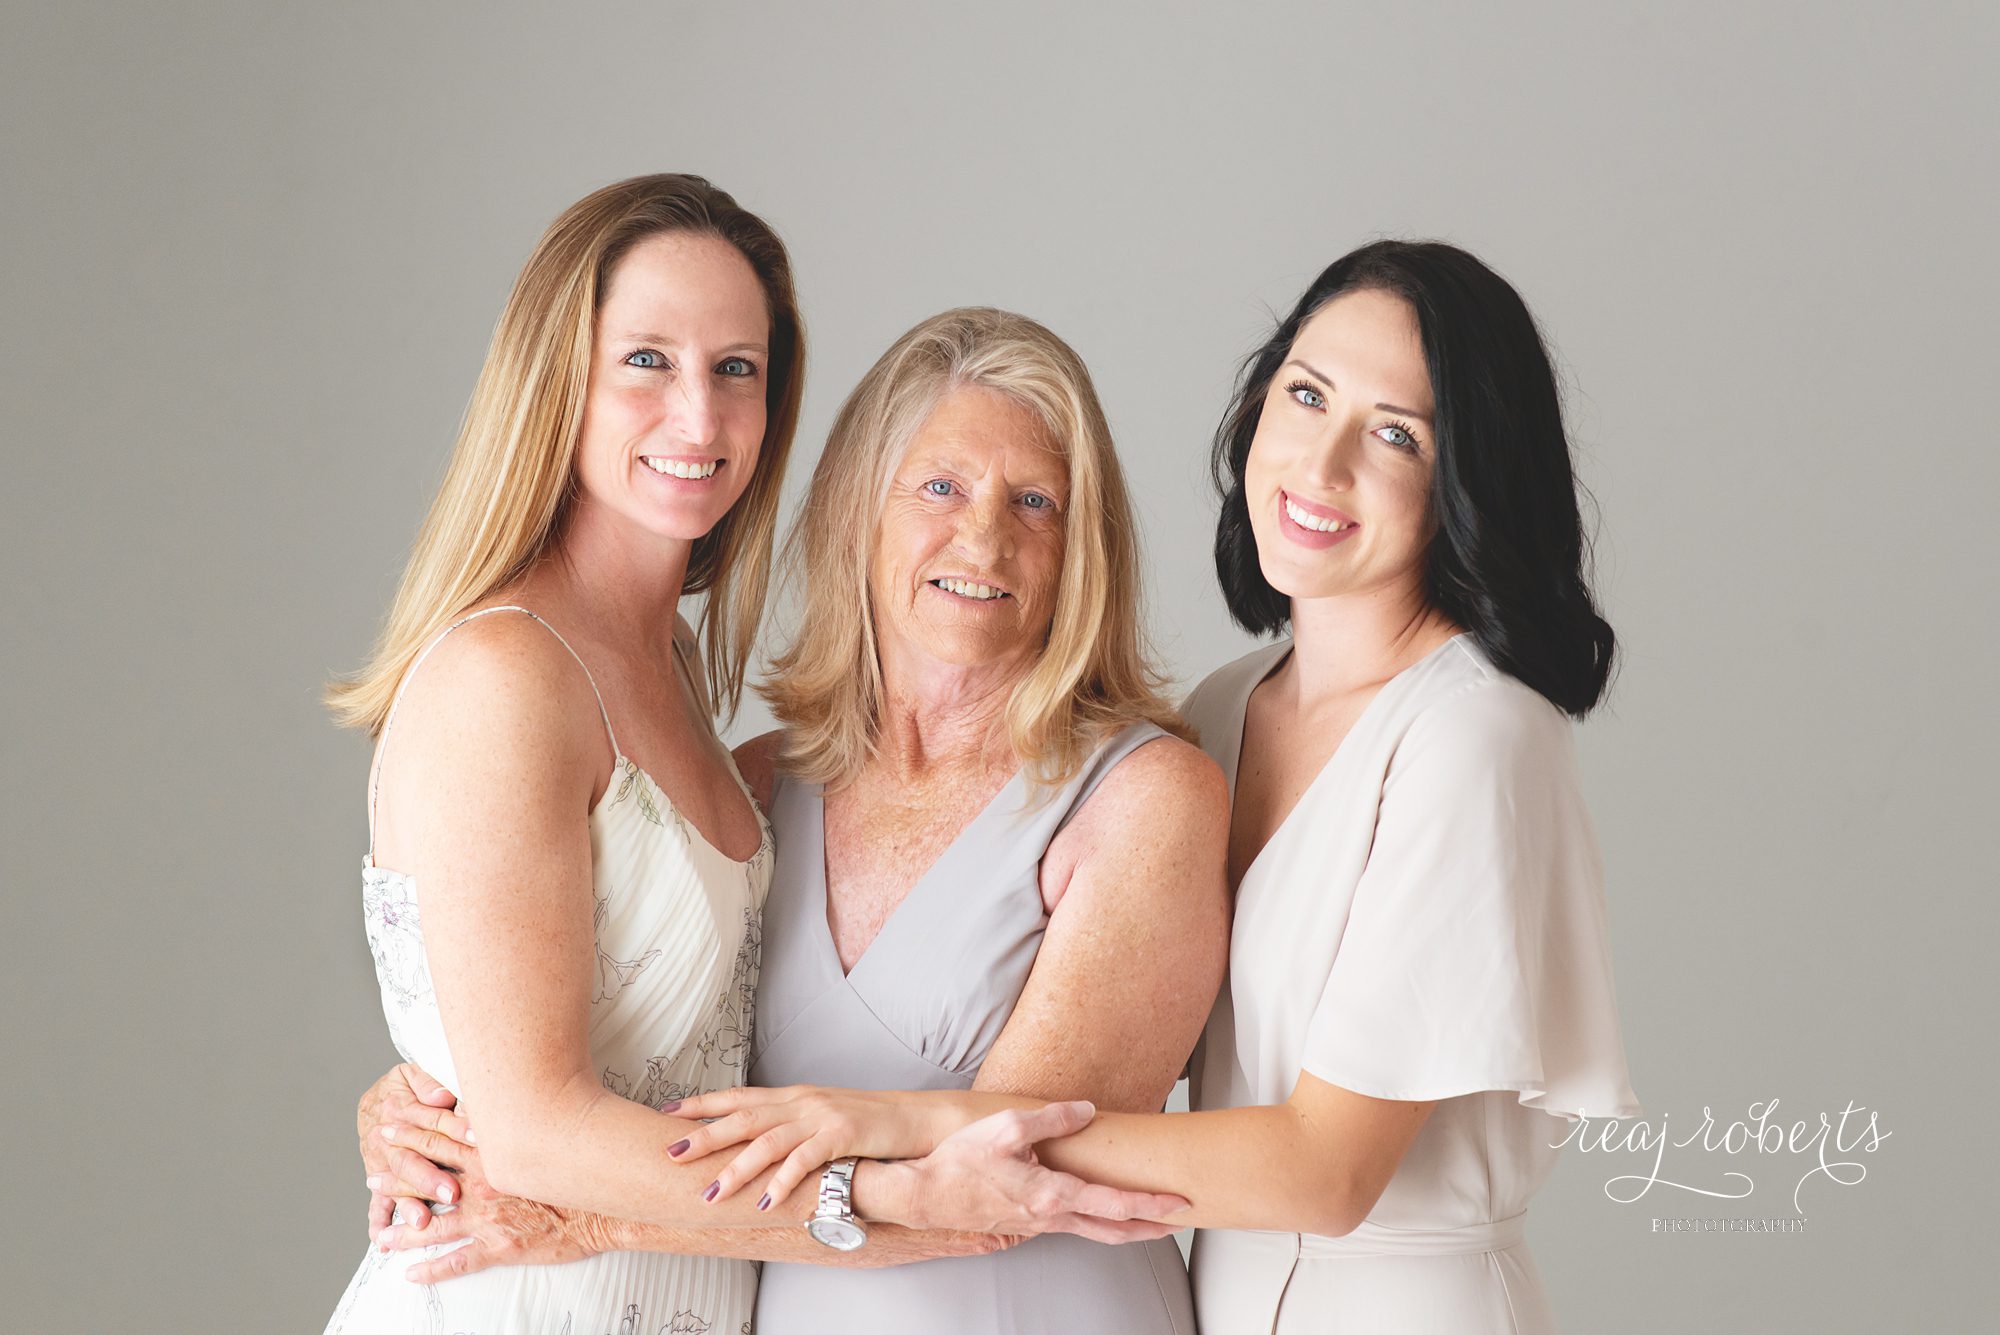 Grandmother, mother, and daughter photo | Reaj Roberts Photography